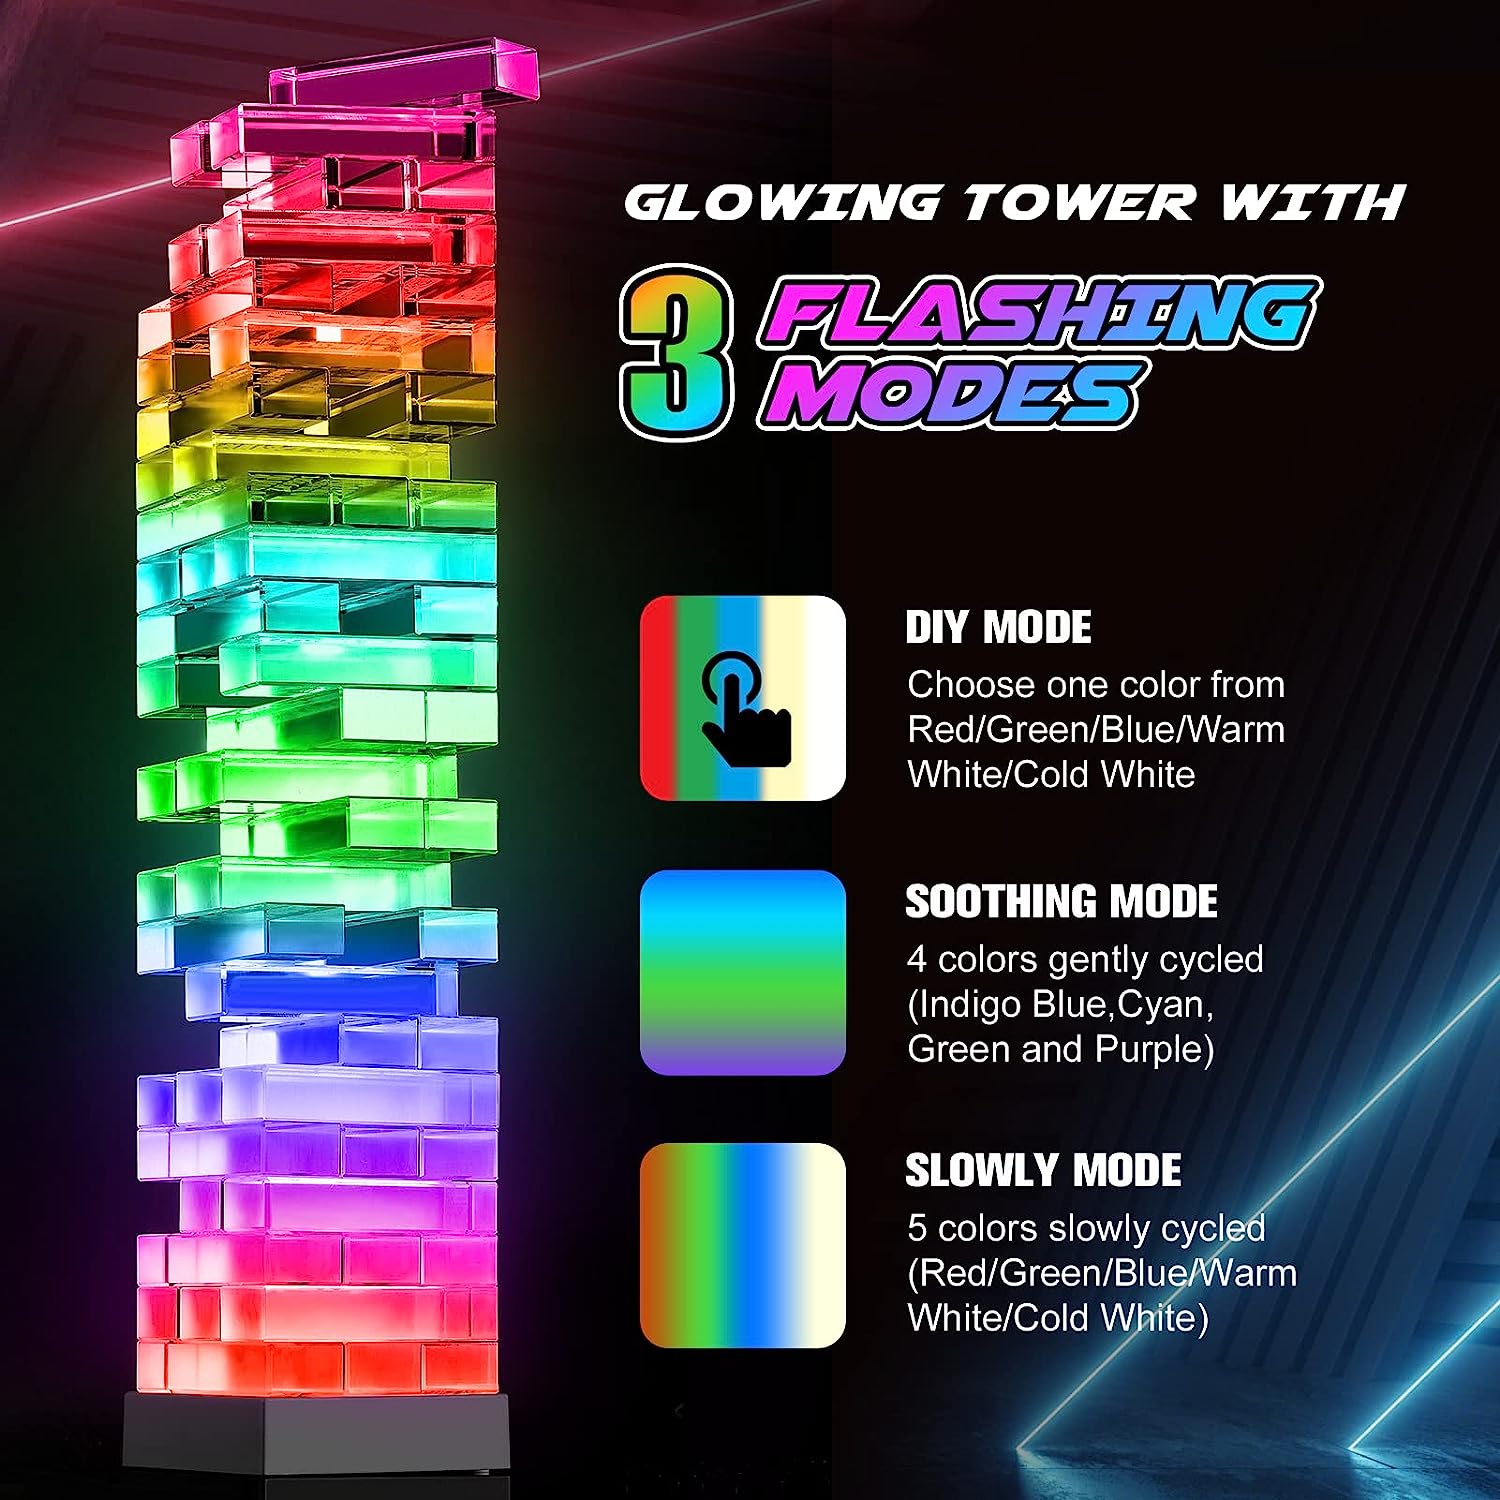 Party Games for Adults and Family,Adult Games for Game Night,3 Flash Mode Light Up Tumble Tower with 48 Rules,Board Games for Parties Adults Gathering,Fun Camping Games for Adults,Games Gift Ideas